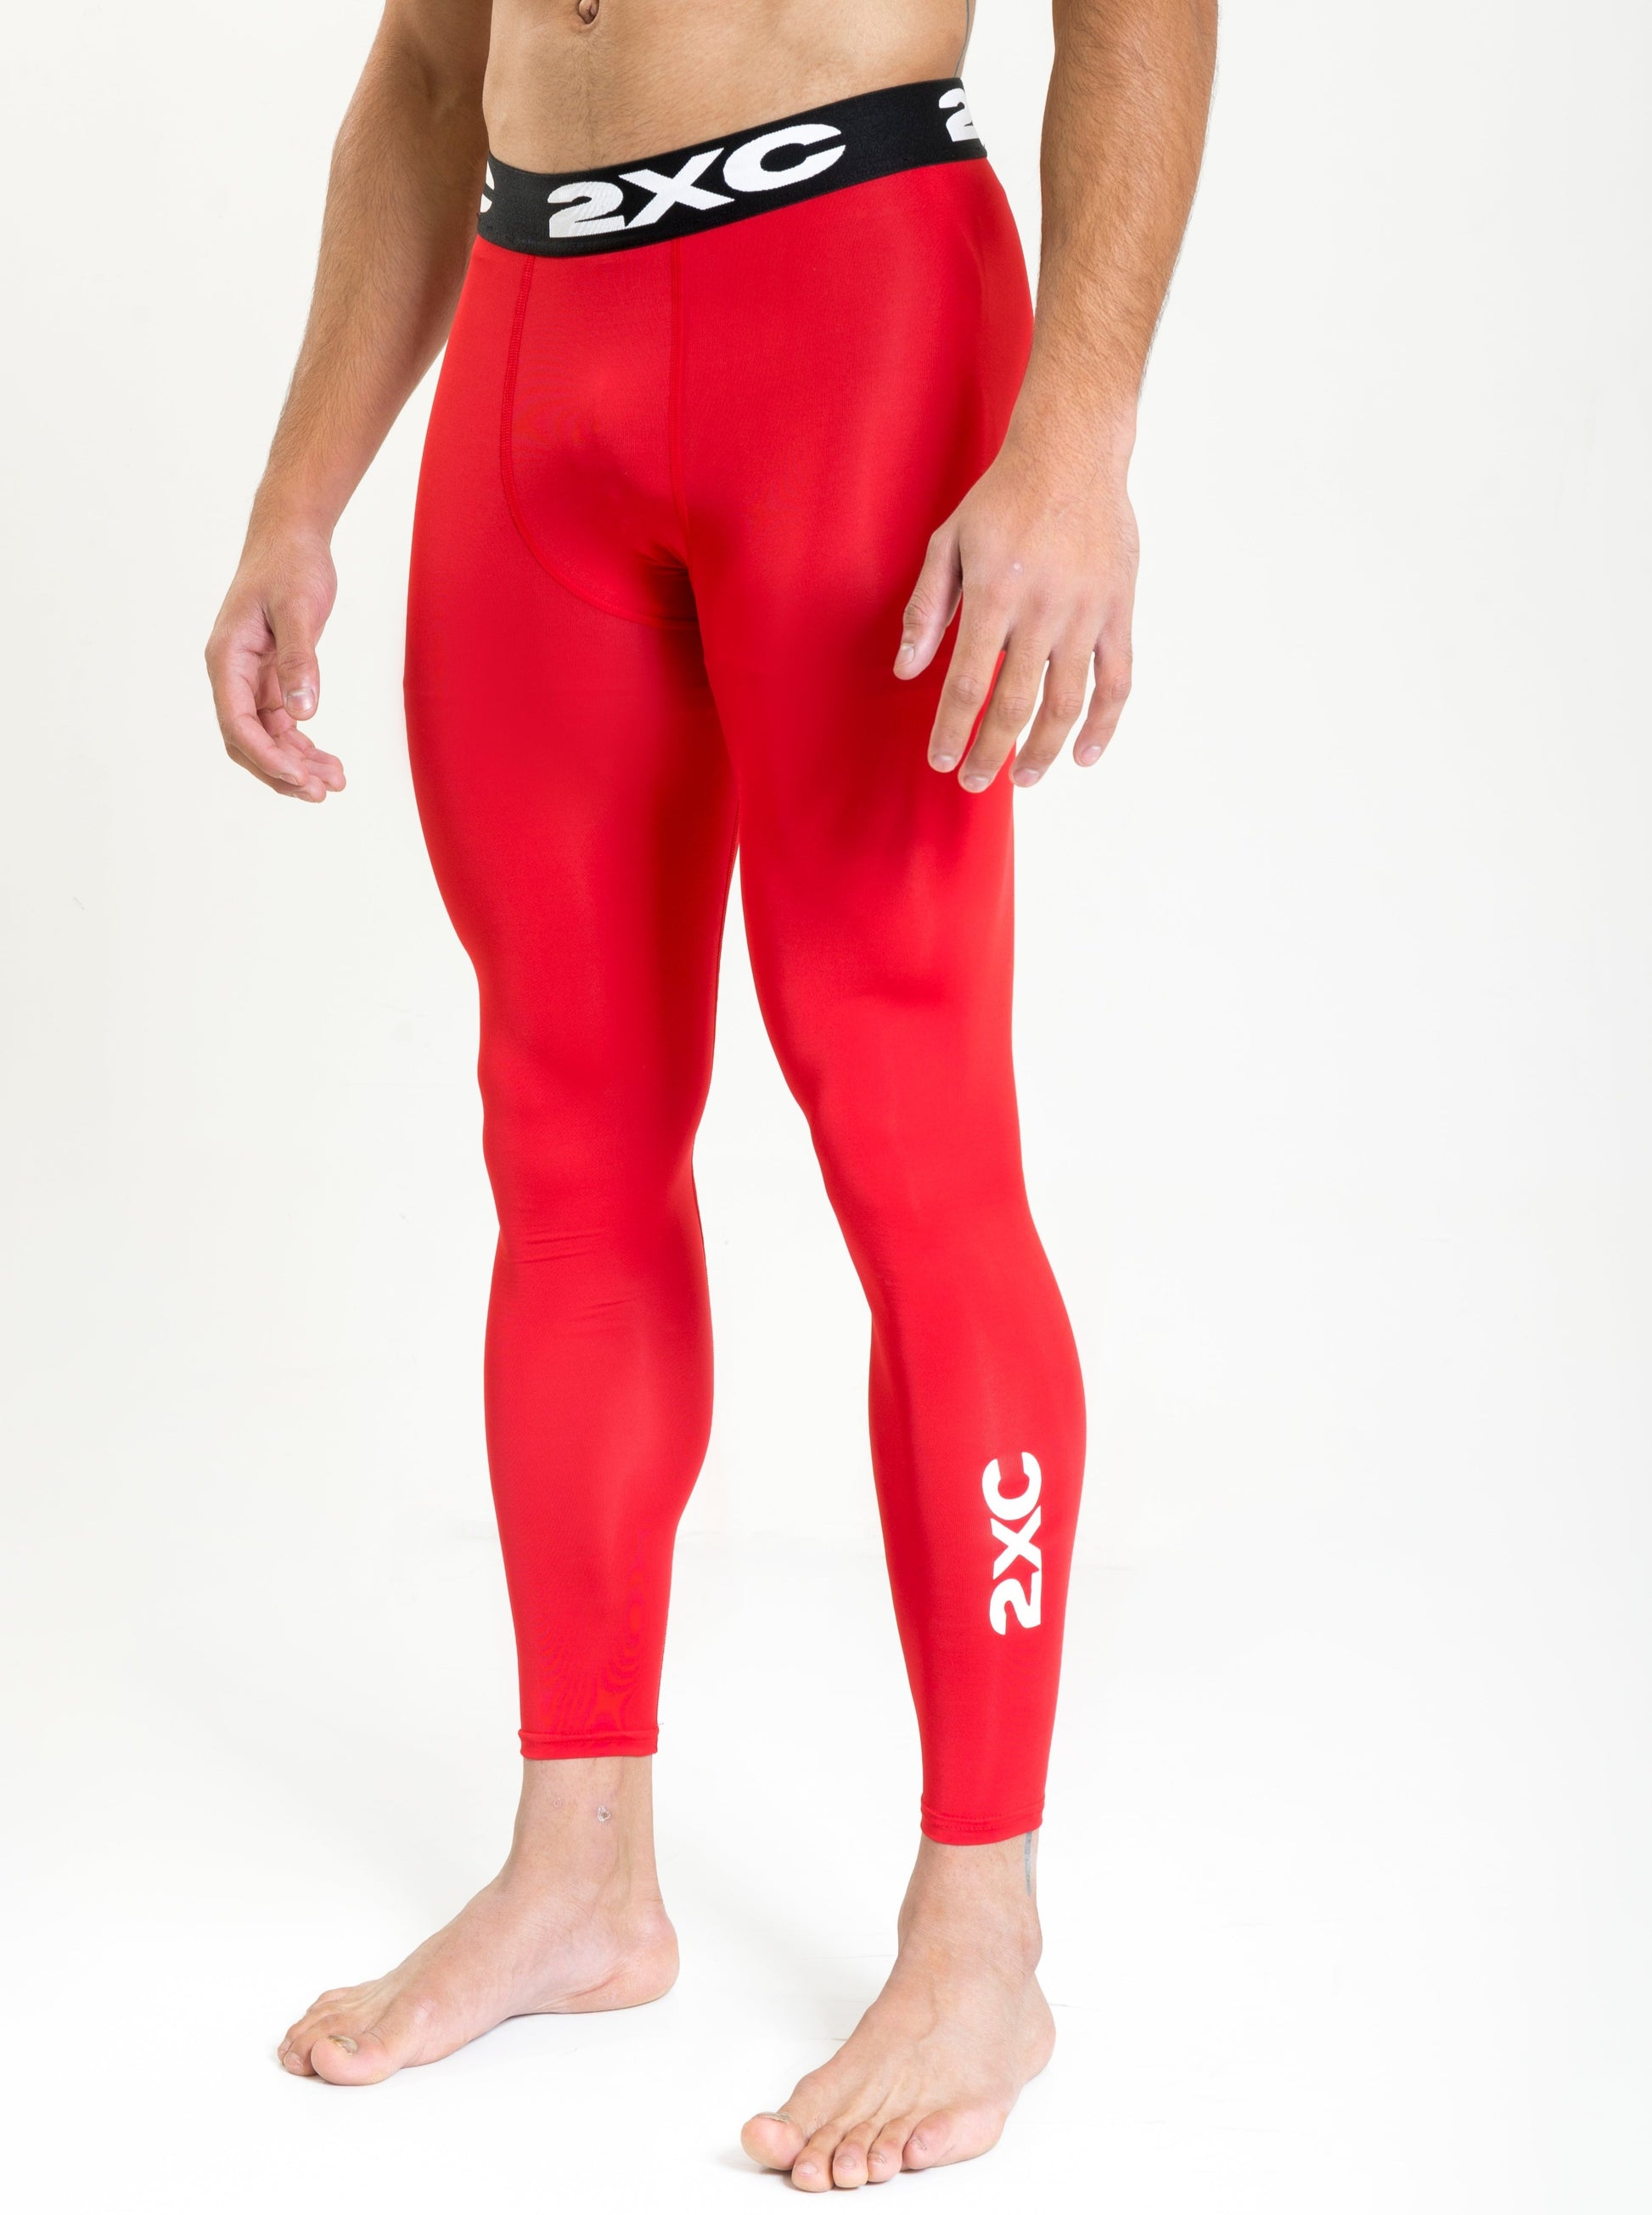 SKINS Women's 1-Series Compression Long Tights - Red